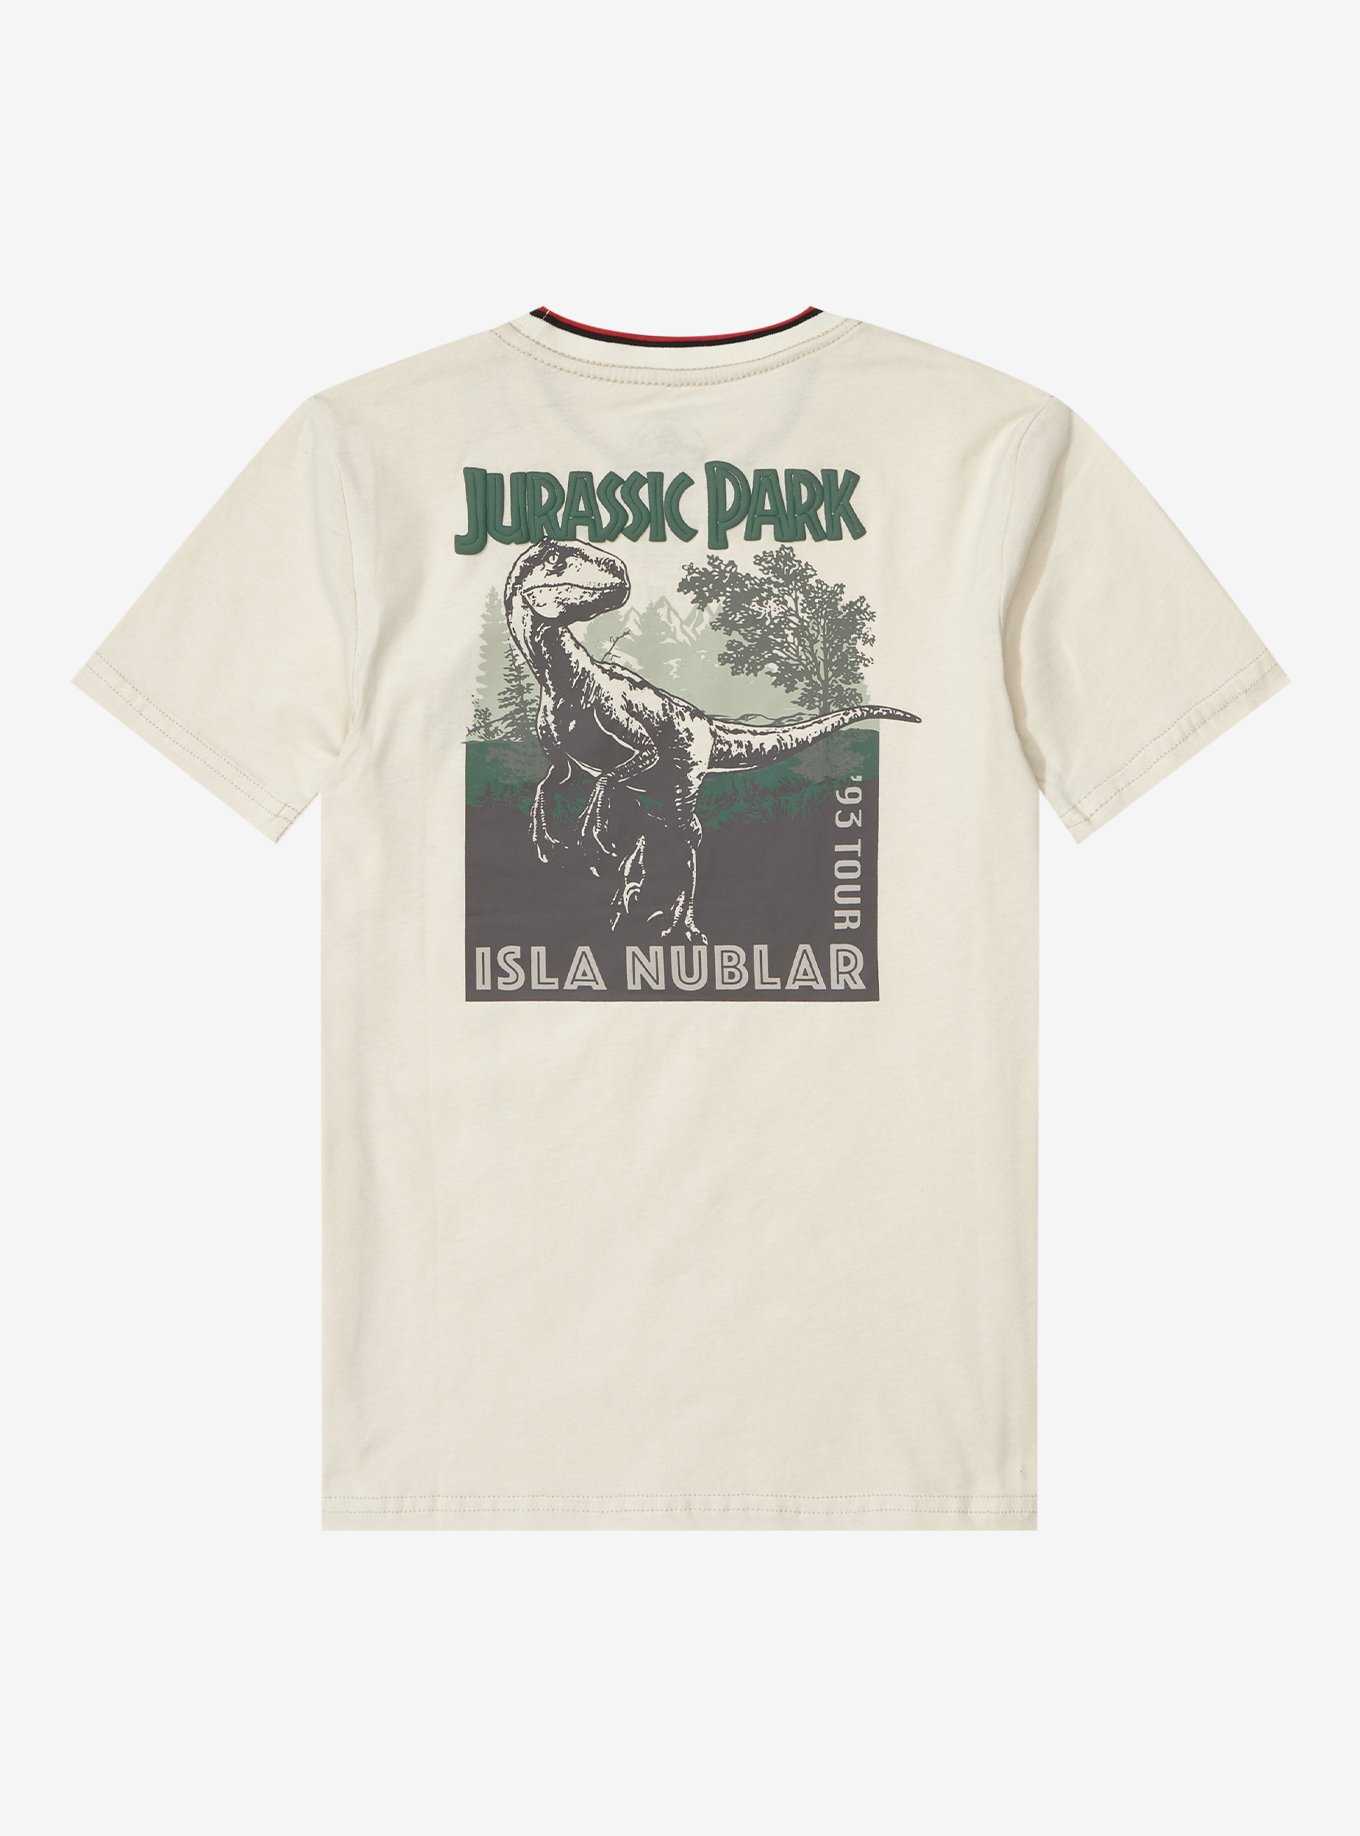 Jurassic Park Velociraptor Print Youth T-Shirt - BoxLunch Exclusive, , hi-res